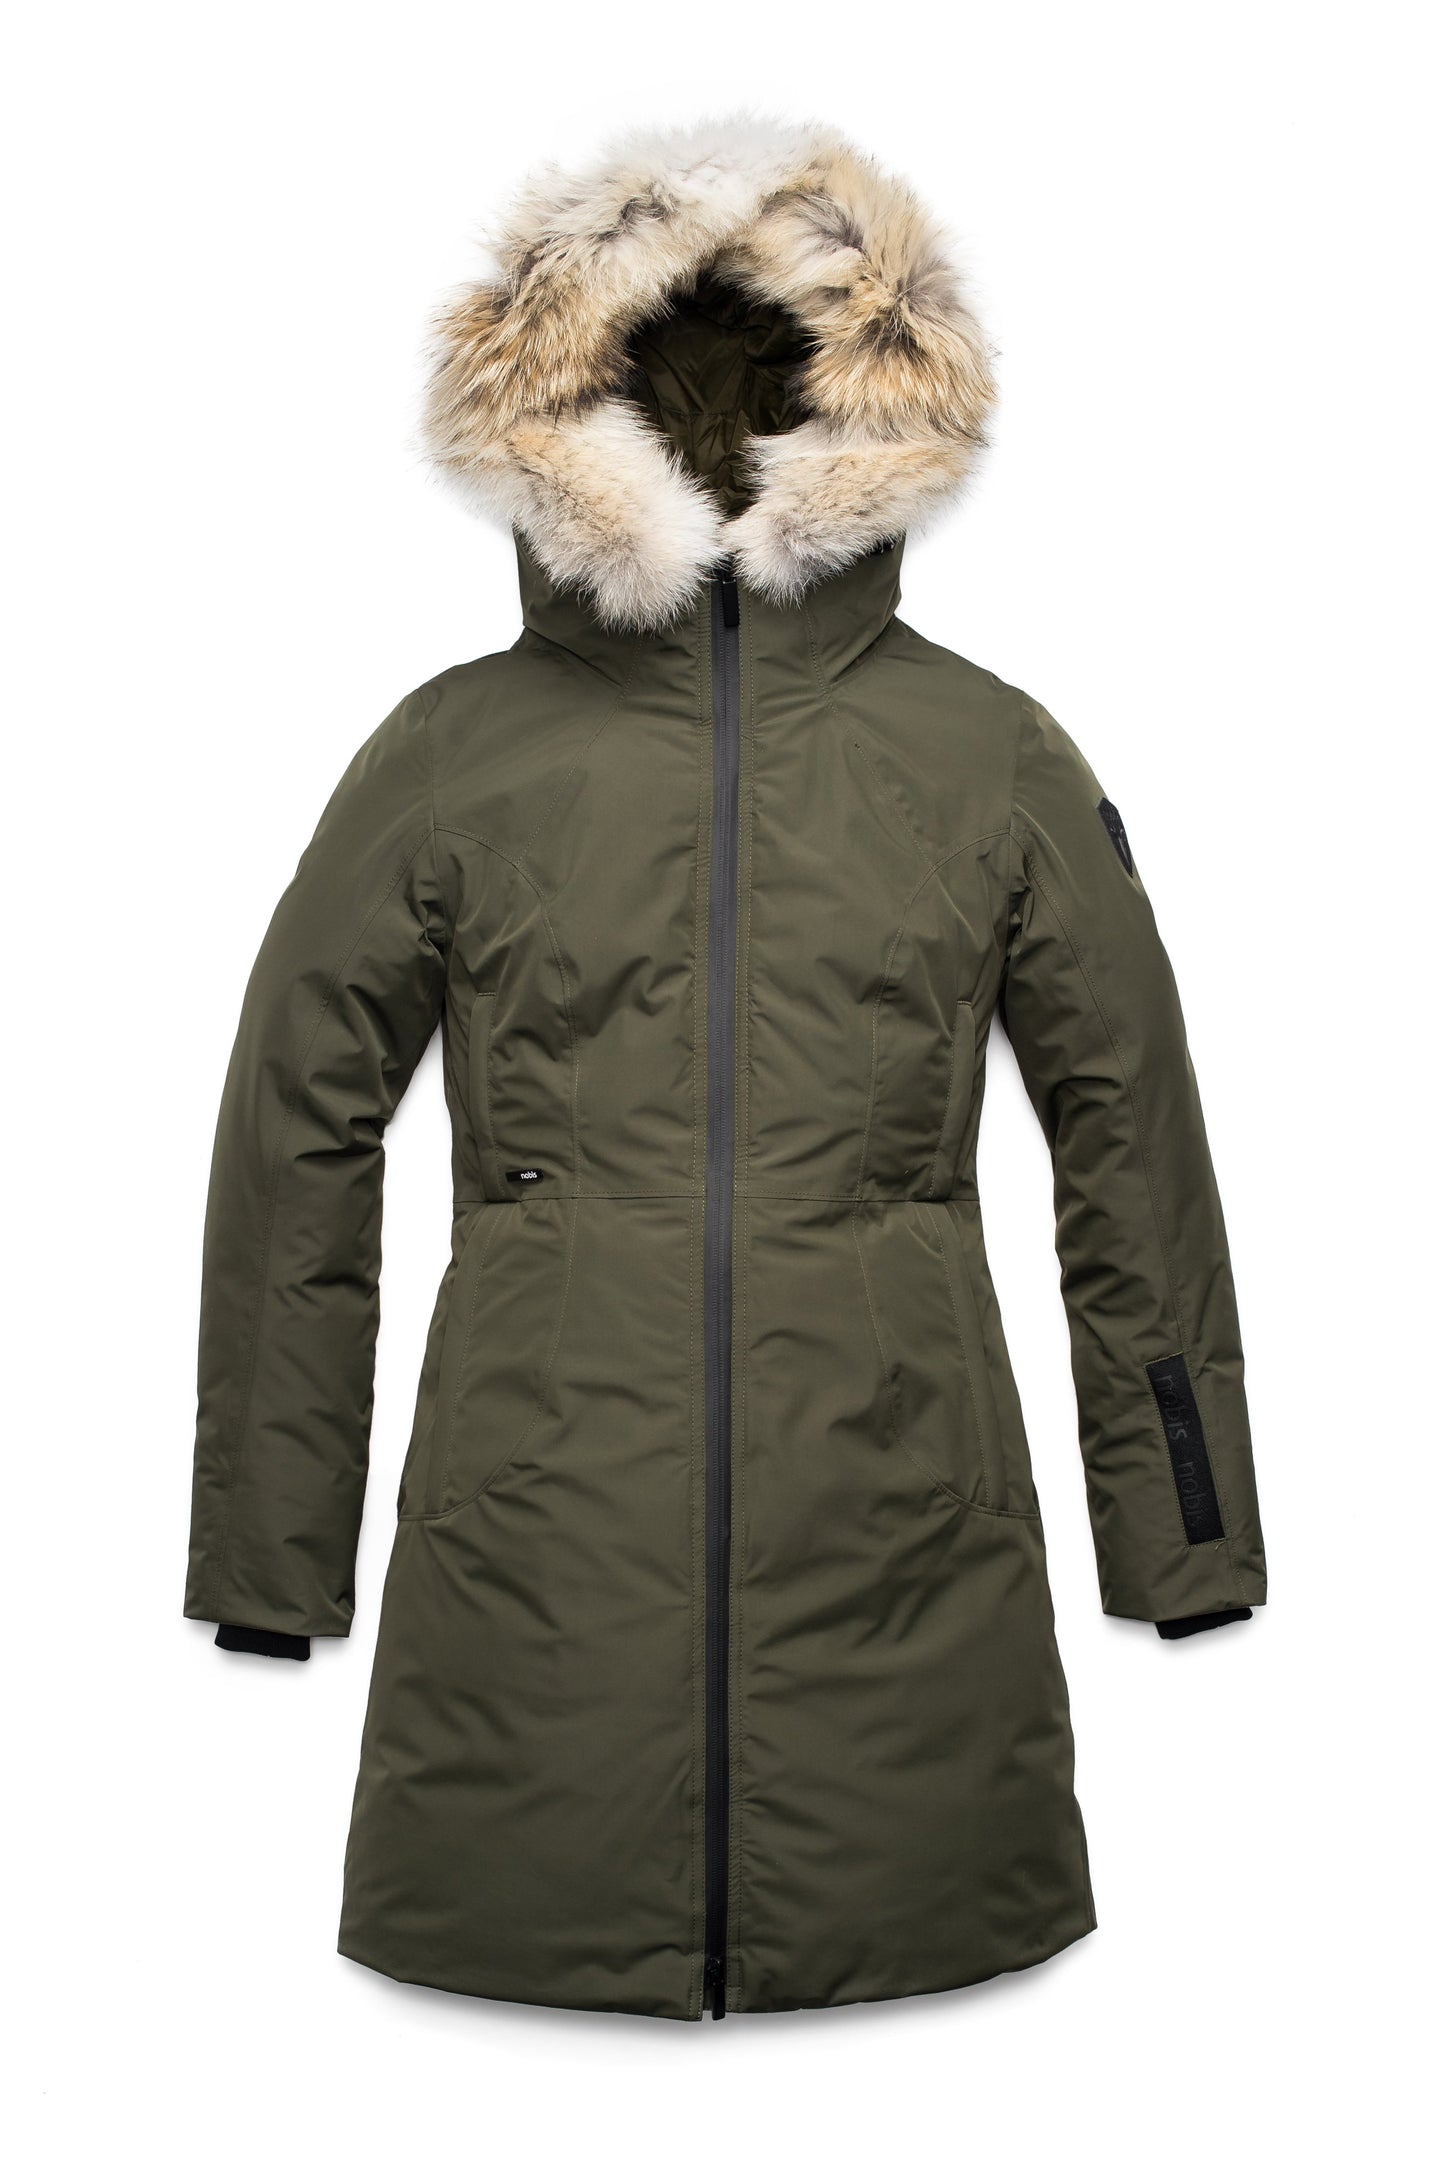 Ladies thigh length down-filled parka with non-removable hood and removable coyote fur trim in Fatigue